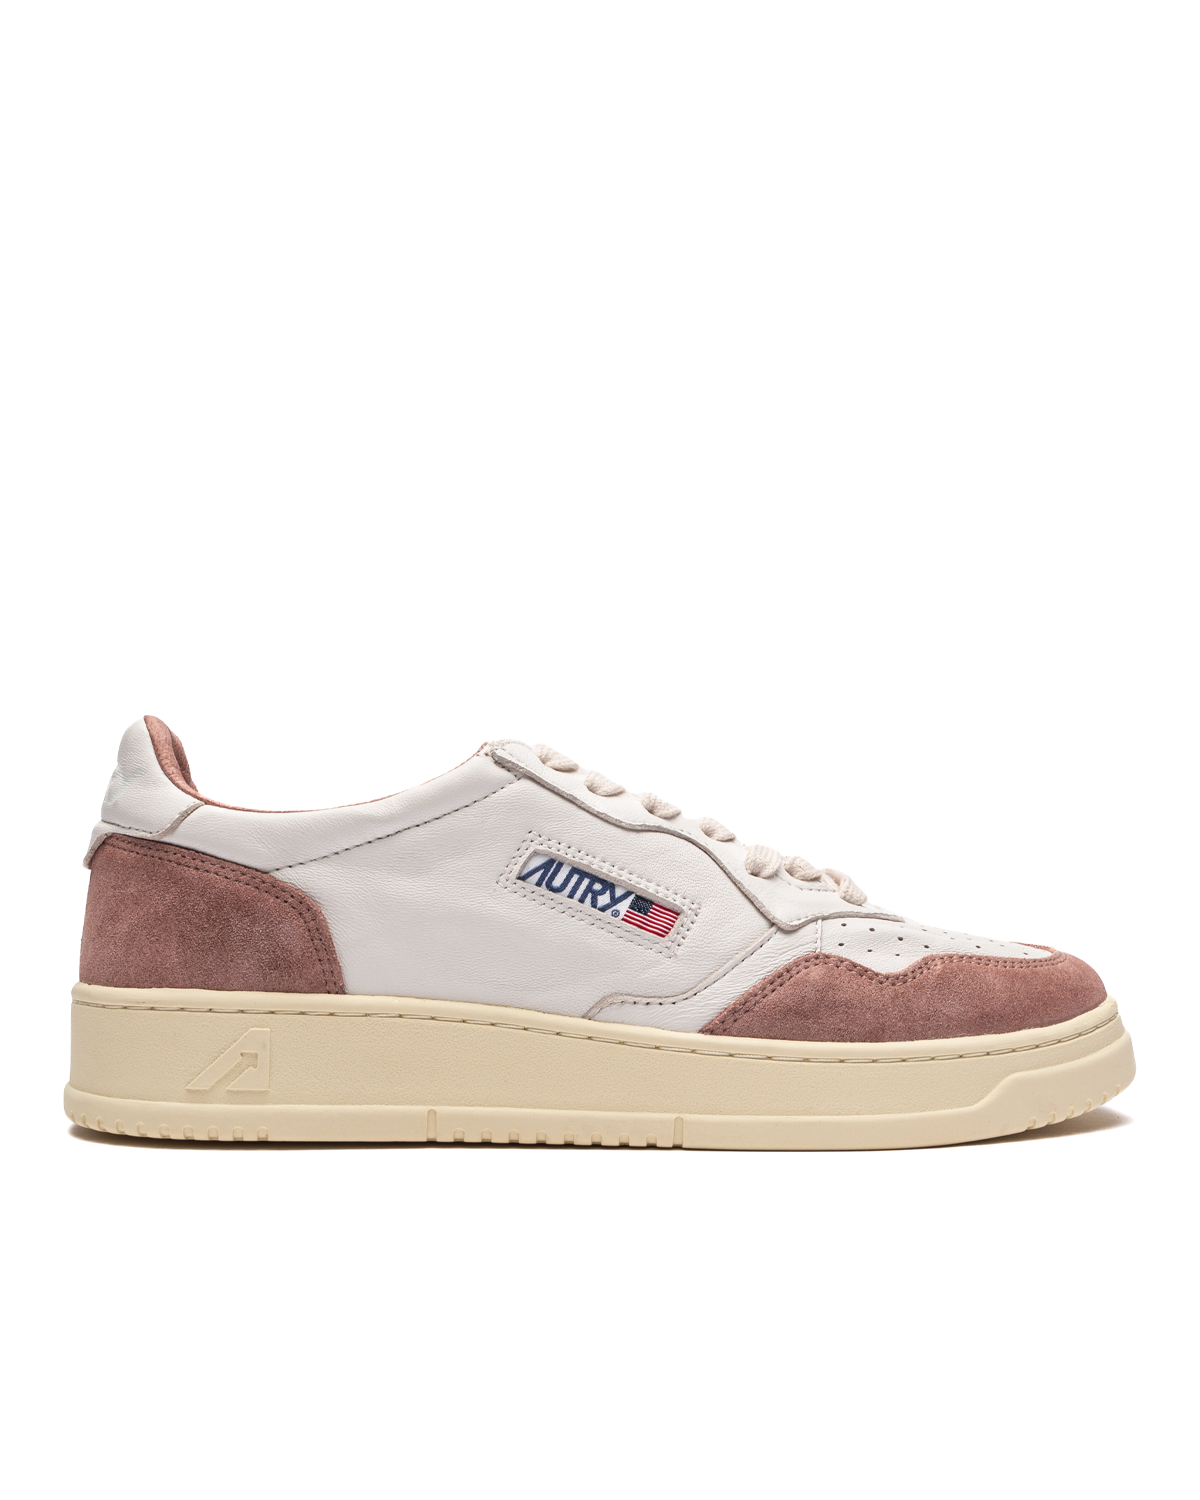 Medalist Goat Suede White/Nude